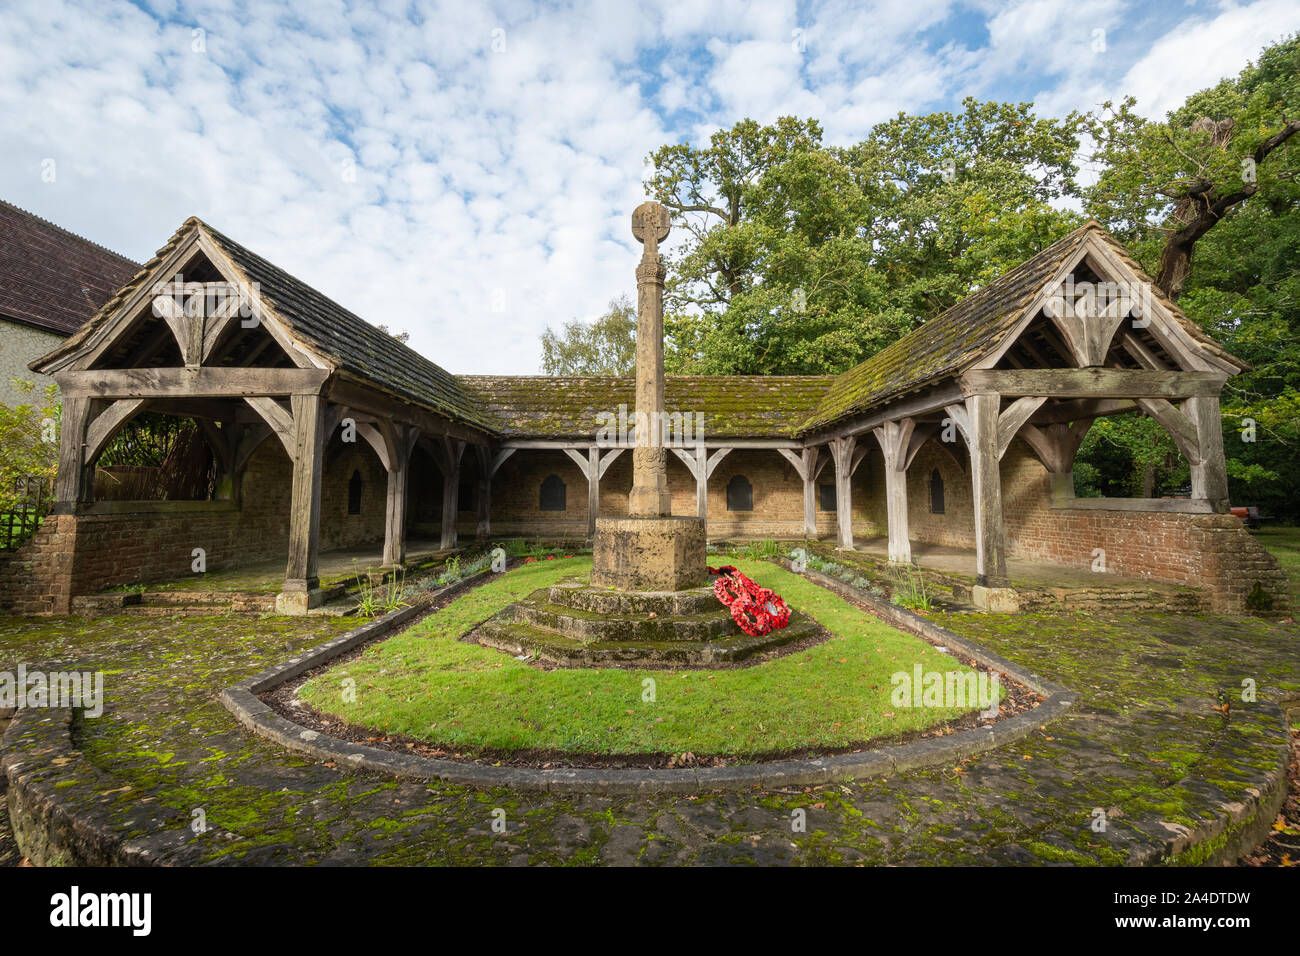 The first world war memorial cloister in the Hampshire village of Blackmoor, UK Stock Photo